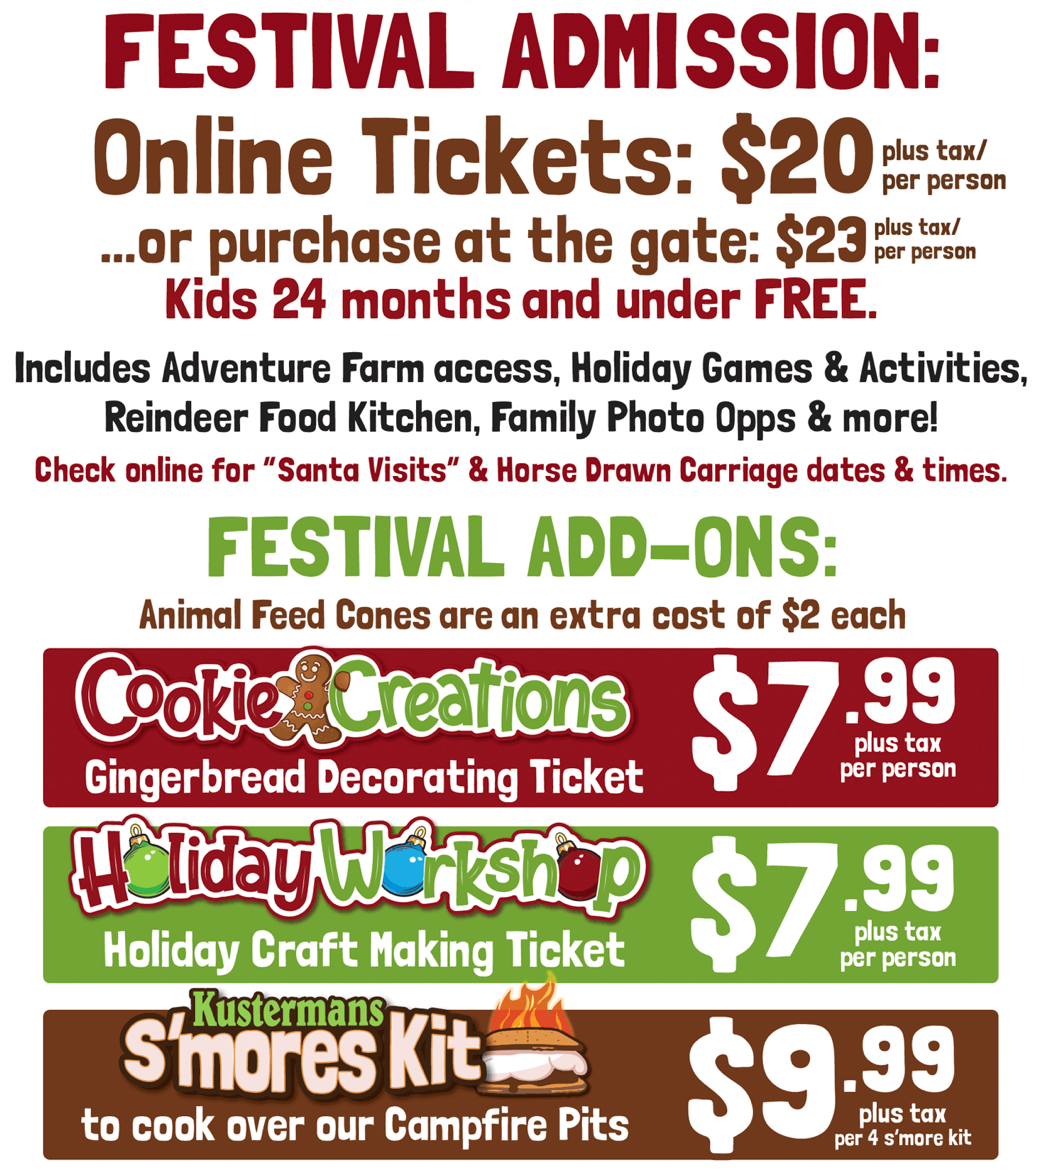 Kustermans 'Tis the Season Holiday Festival Admission and Ticket Prices